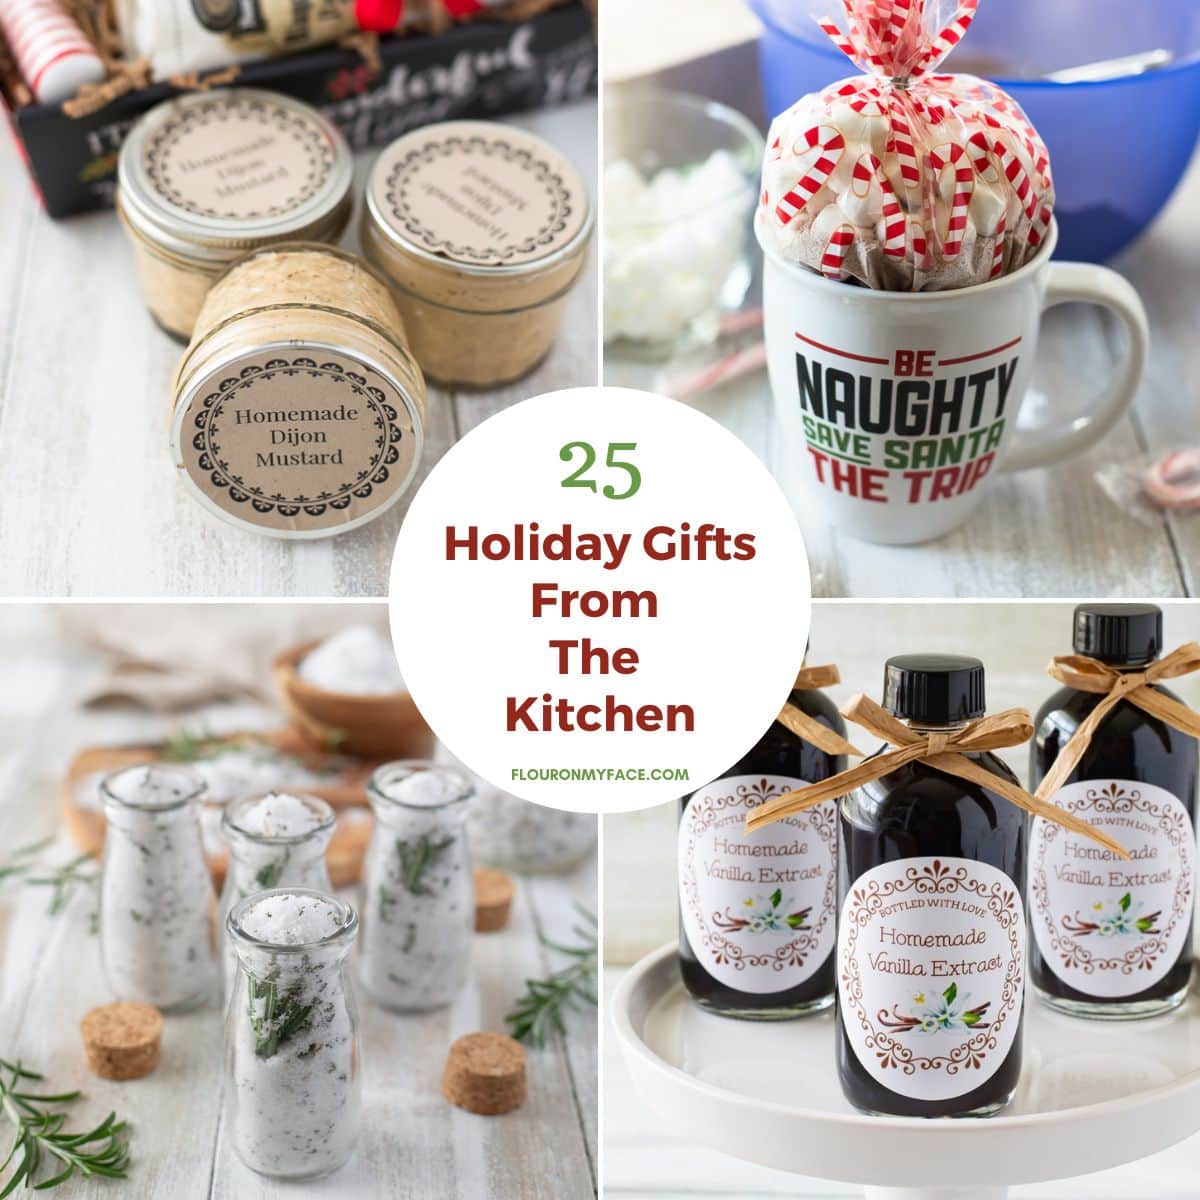 https://flouronmyface.com/wp-content/uploads/2013/11/holiday_gifts_from_kitchen.jpg